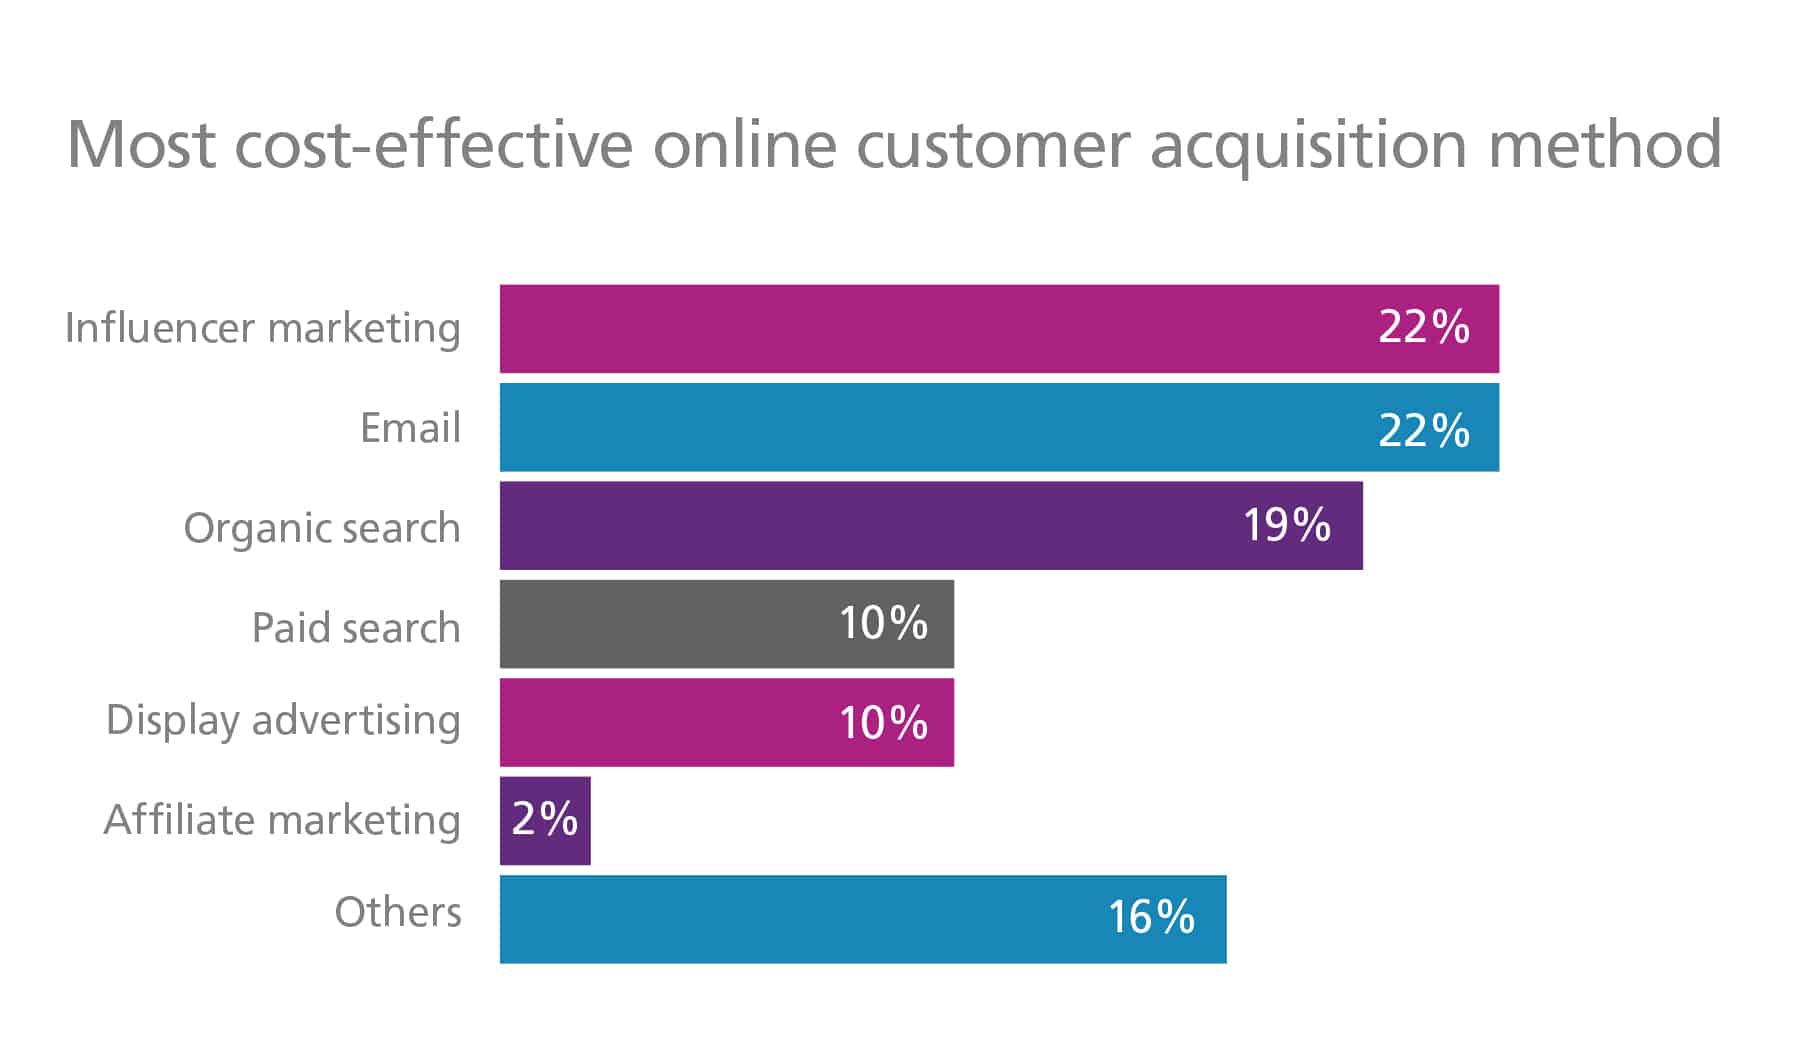 Bar graph of most cost-effective online customer acquisition methods